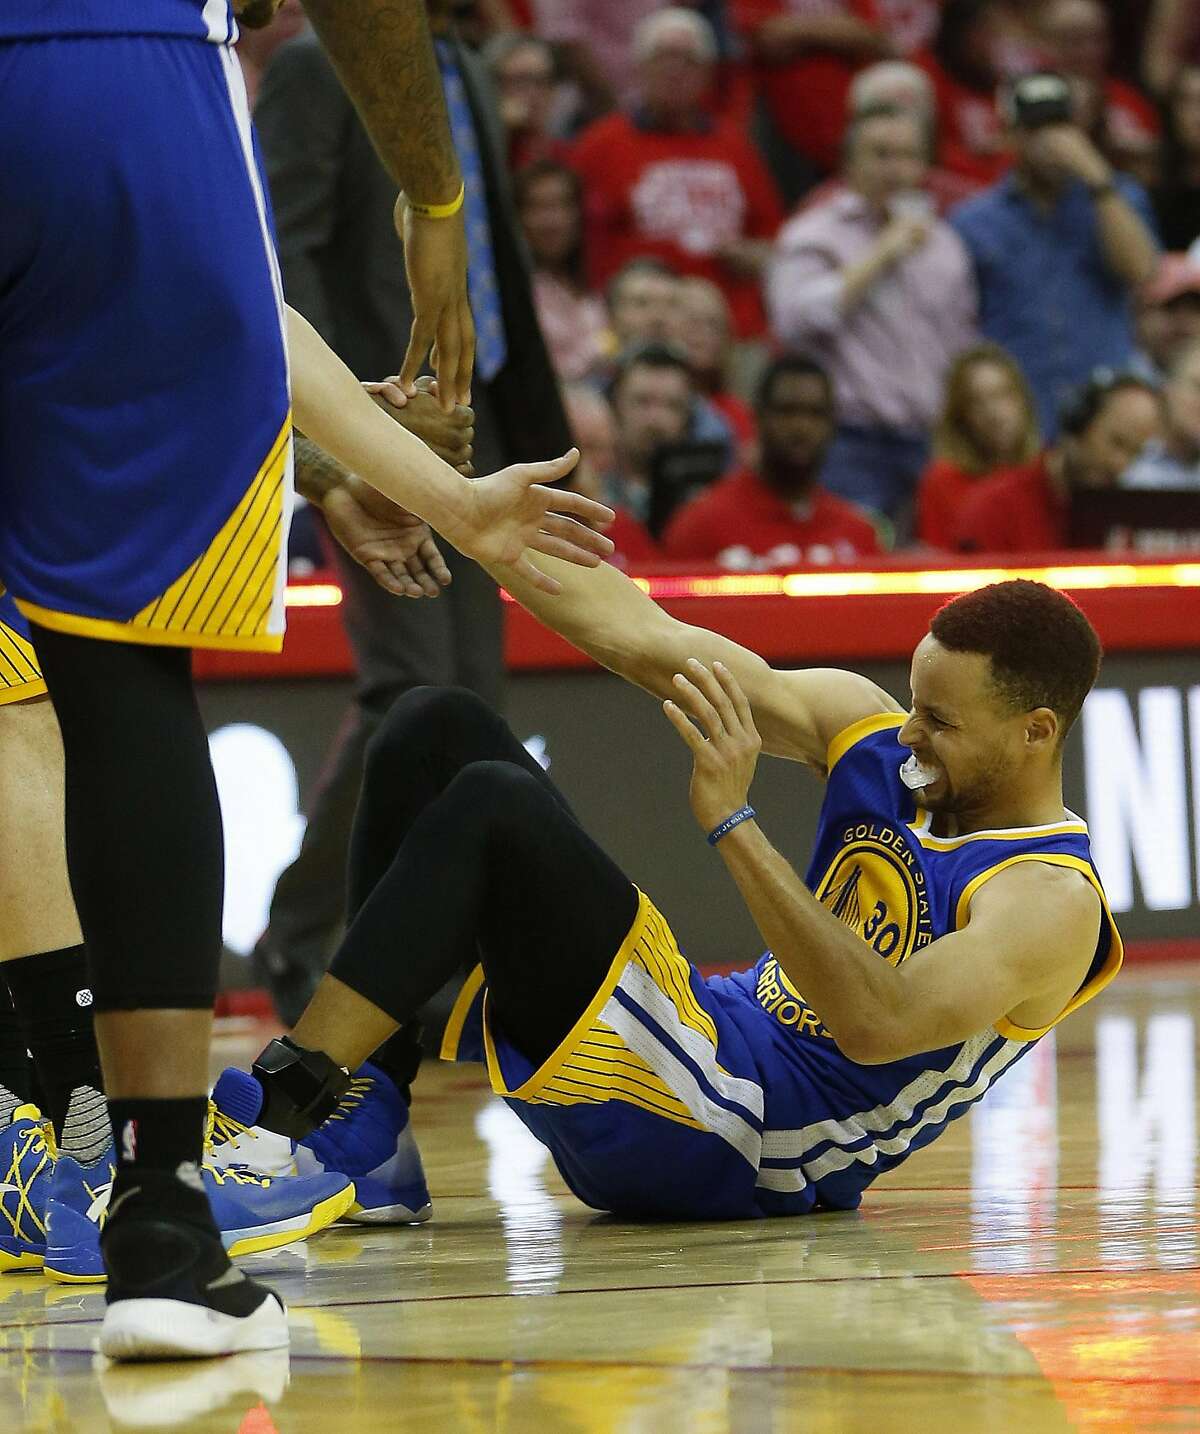 In this Sunday, April 24, 2016 photo, Golden State Warriors guard Stephen Curry (30) is helped up after being injured on the final play during the first half of Game 4 in the first round of the NBA playoff series against the Houston Rockets, in Houston. Golden State's record-setting run toward a second consecutive NBA championship may come down to an MRI on the sprained right knee of Stephen Curry. The NBA's reigning MVP missed the second half of a win over the Houston Rockets in Game 4 on Sunday and was expected to have the medical test later Monday. (Karen Warren/Houston Chronicle via AP) MANDATORY CREDIT